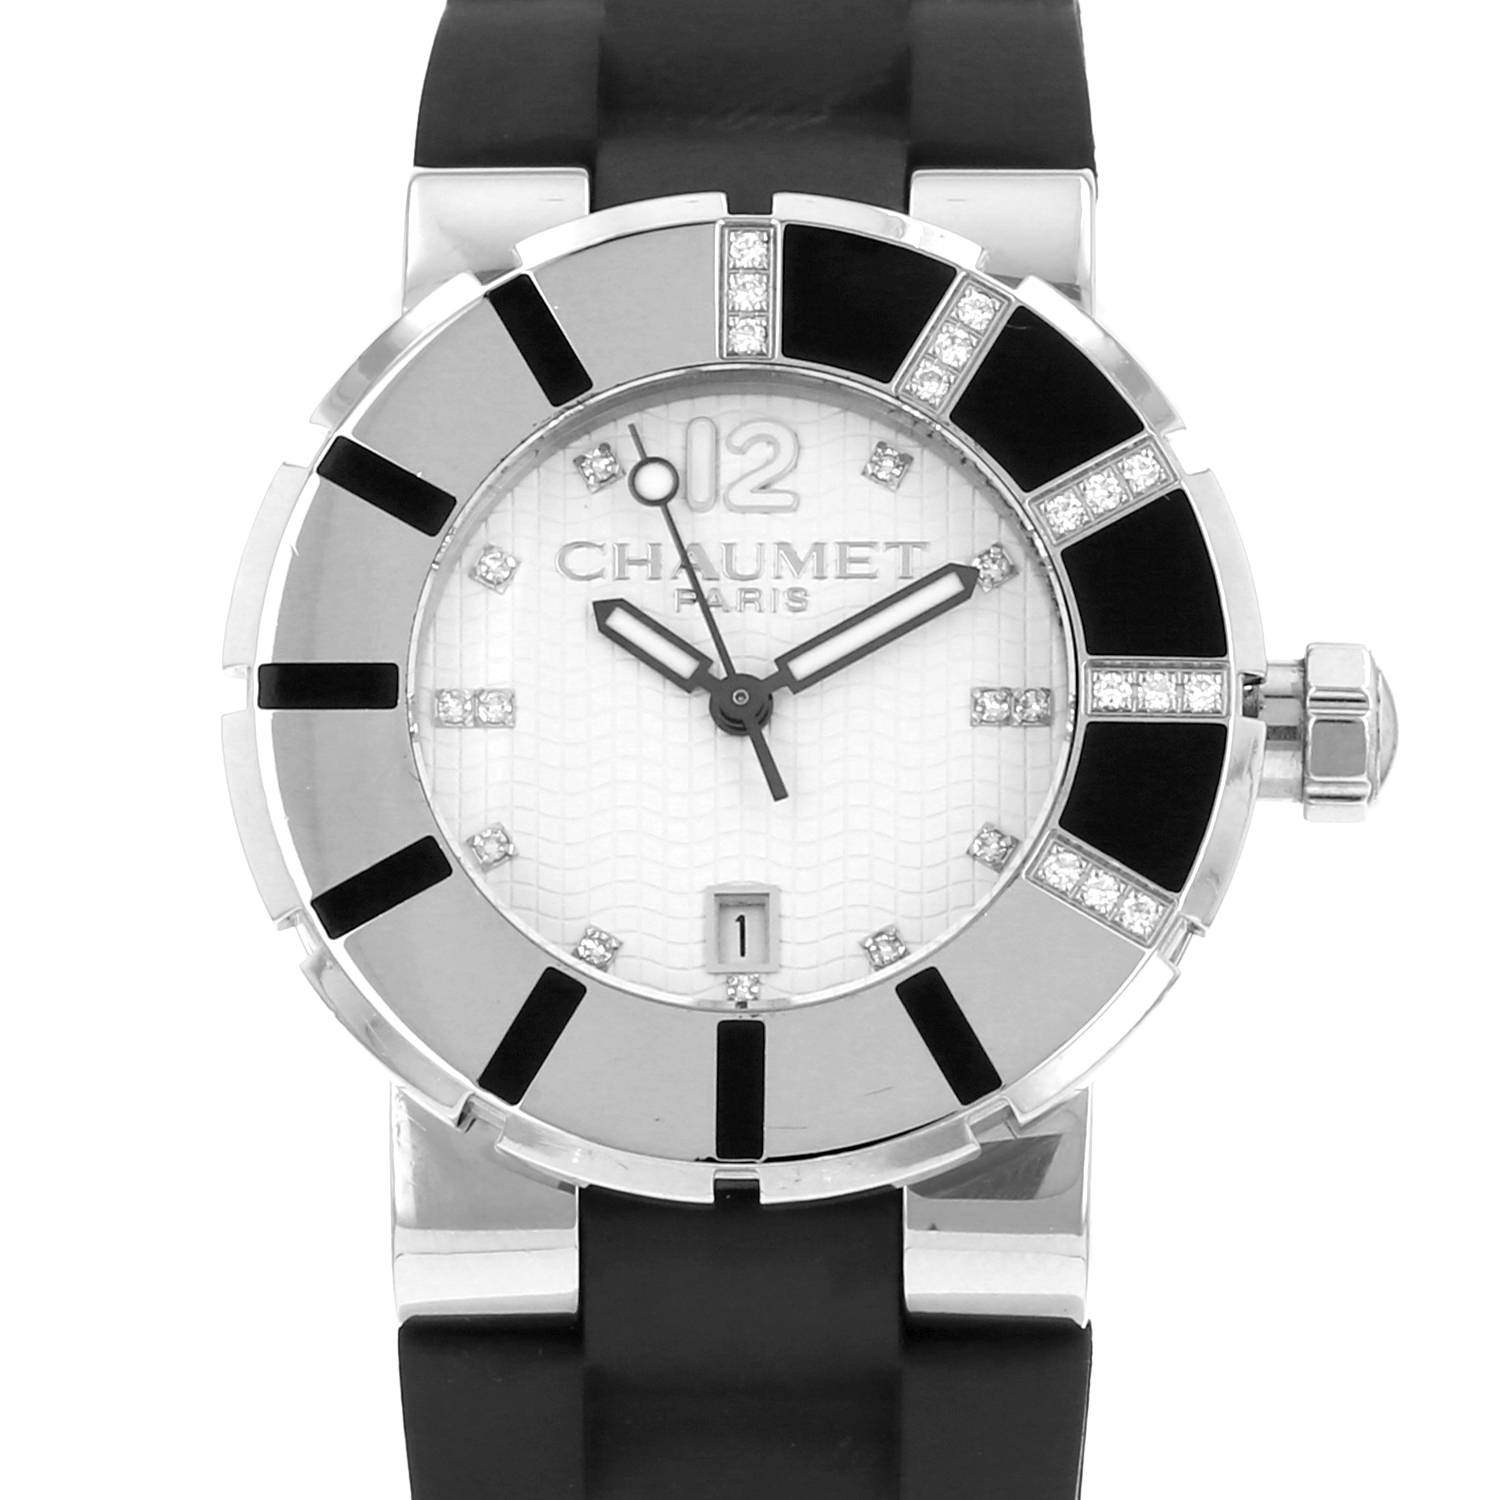 Class One In Stainless Steel Ref: 622C Circa 2010